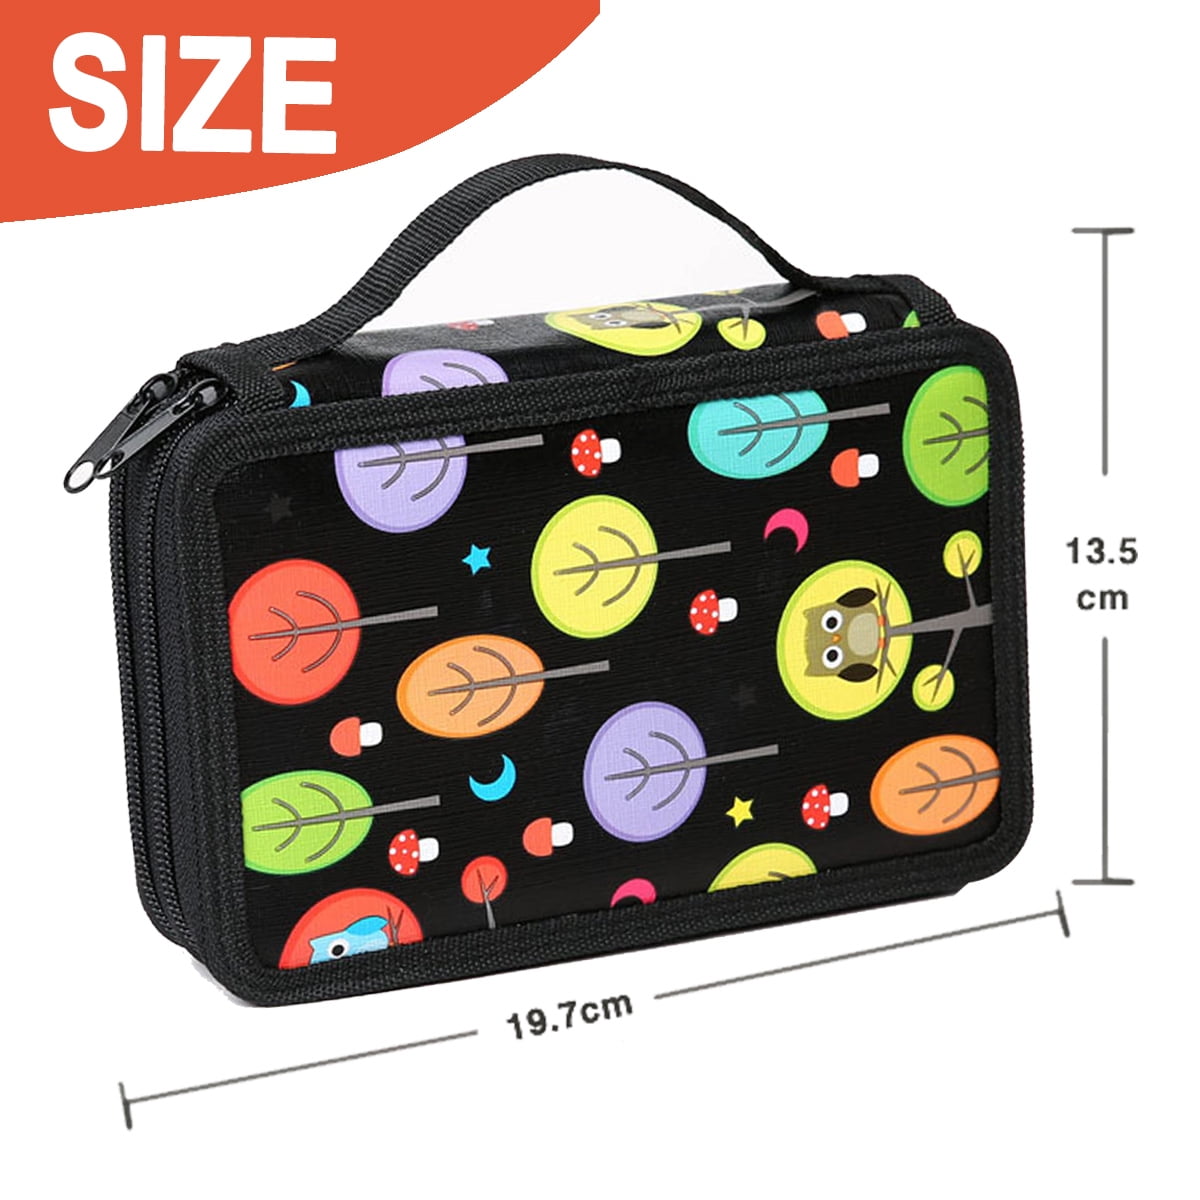 Dropship 1pc Portable Colored Pencil Case, 120 Slots Colored Pencil Case  Organizer With Zipper For Prismacolor Watercolor Pencils, Crayola Colored  Pencils, Marco Pencils to Sell Online at a Lower Price